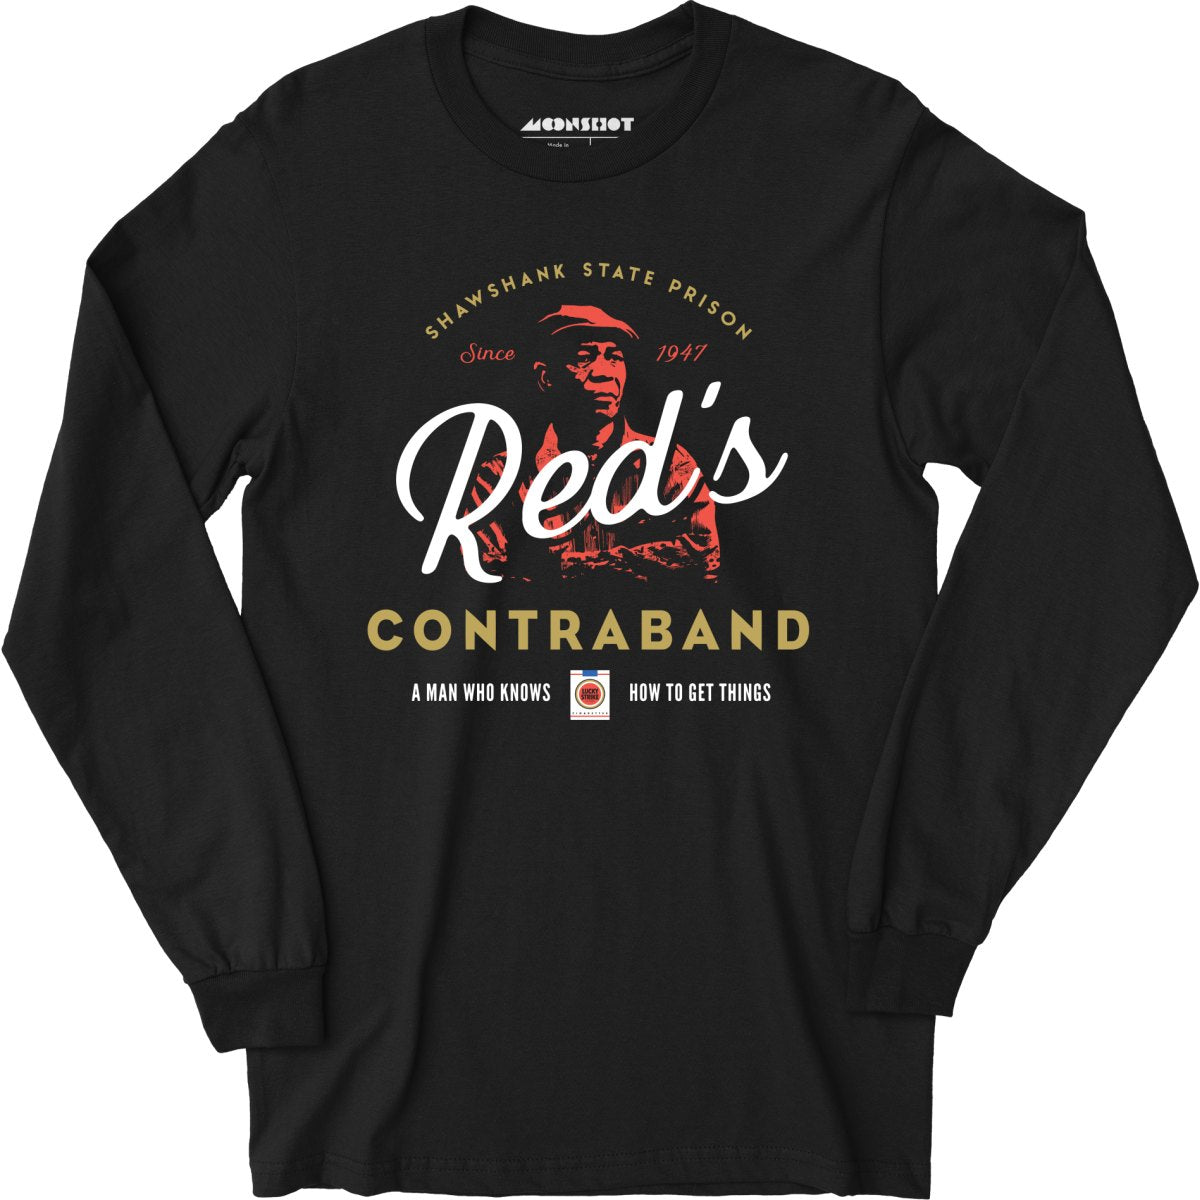 Red's Contraband - Long Sleeve T-Shirt